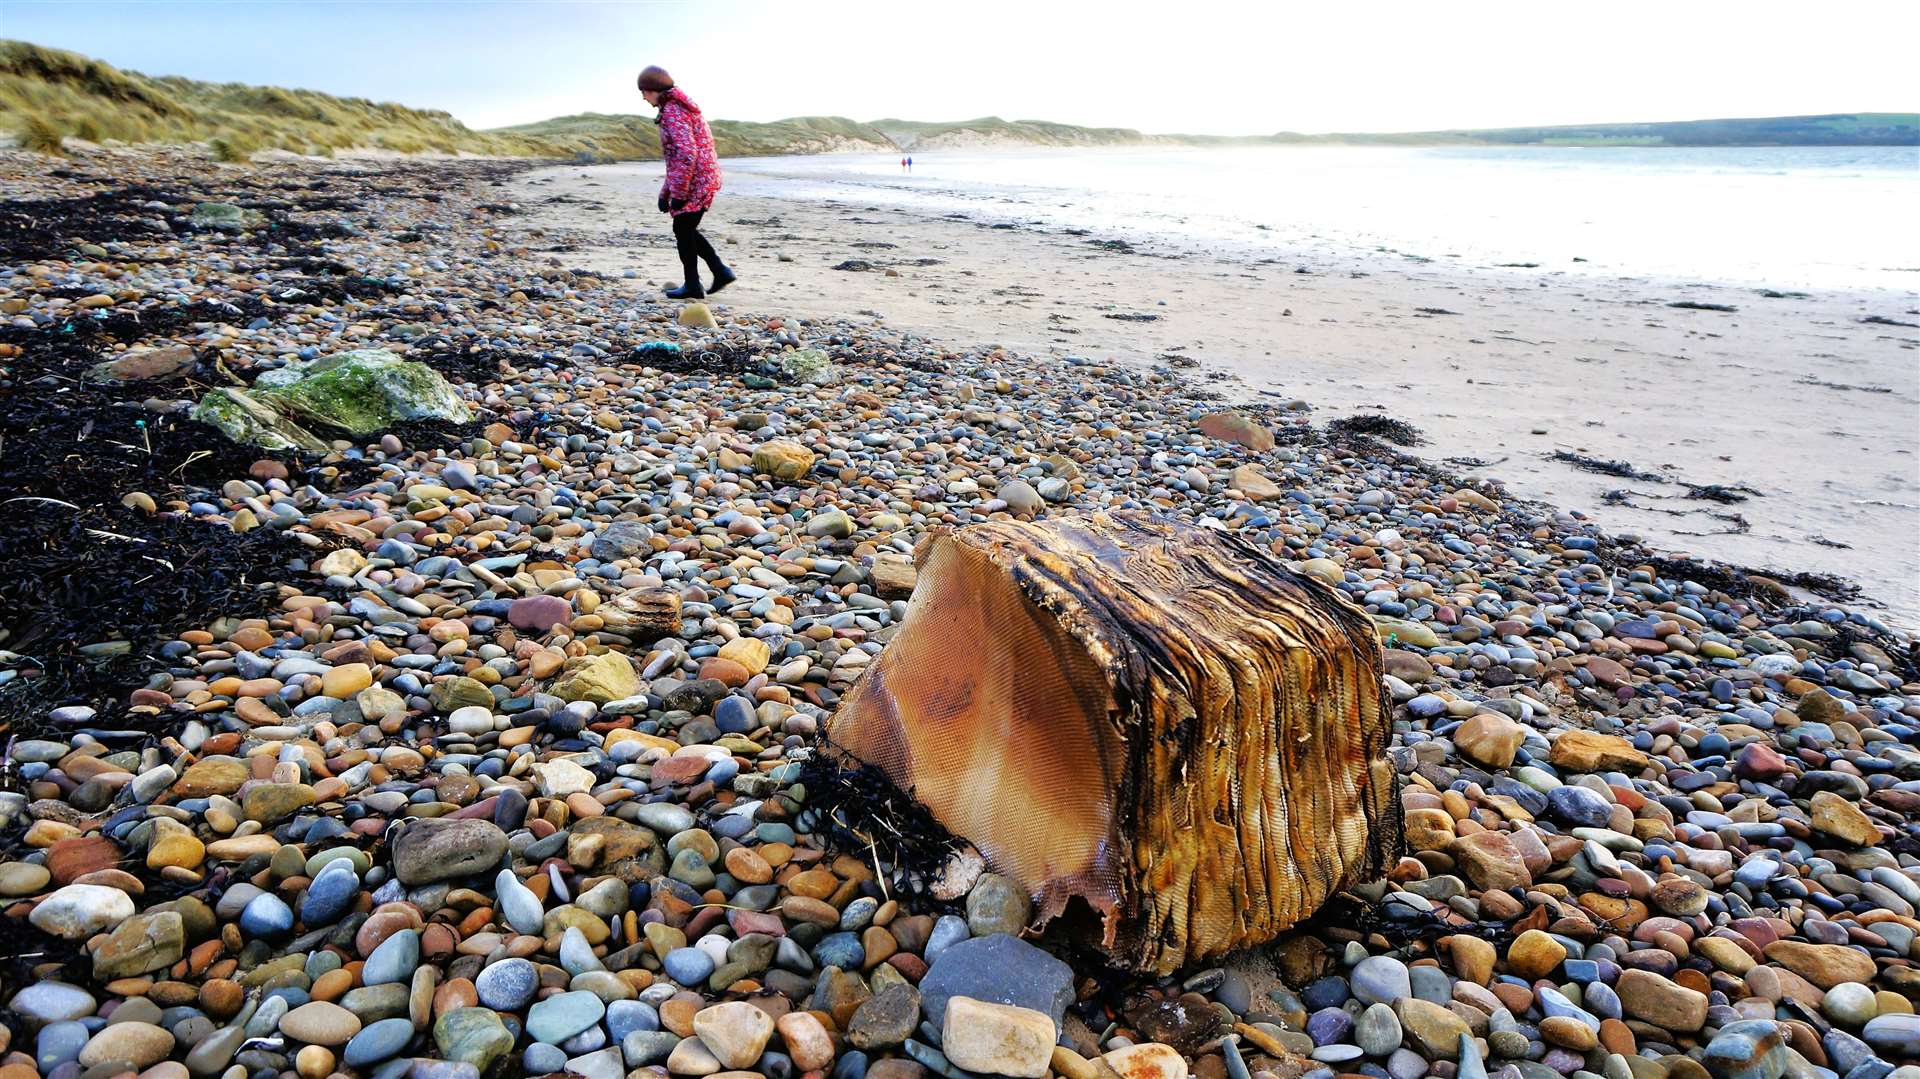 A similar bundle was seen on Dunnet beach in 2019 but has since disappeared. Picture: DGS